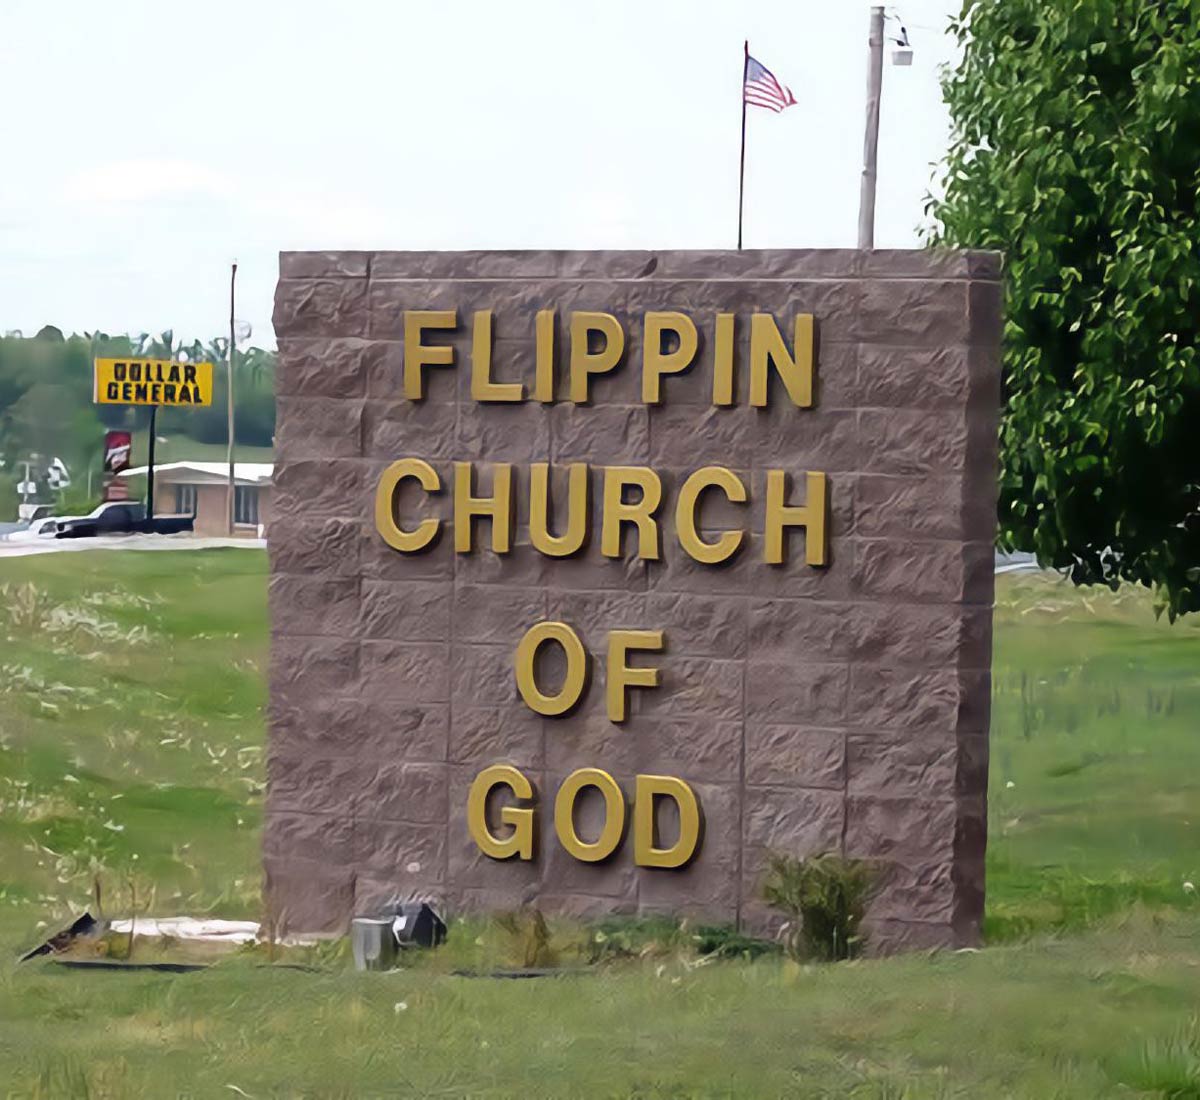 This church in the town of Flippin Arkansas